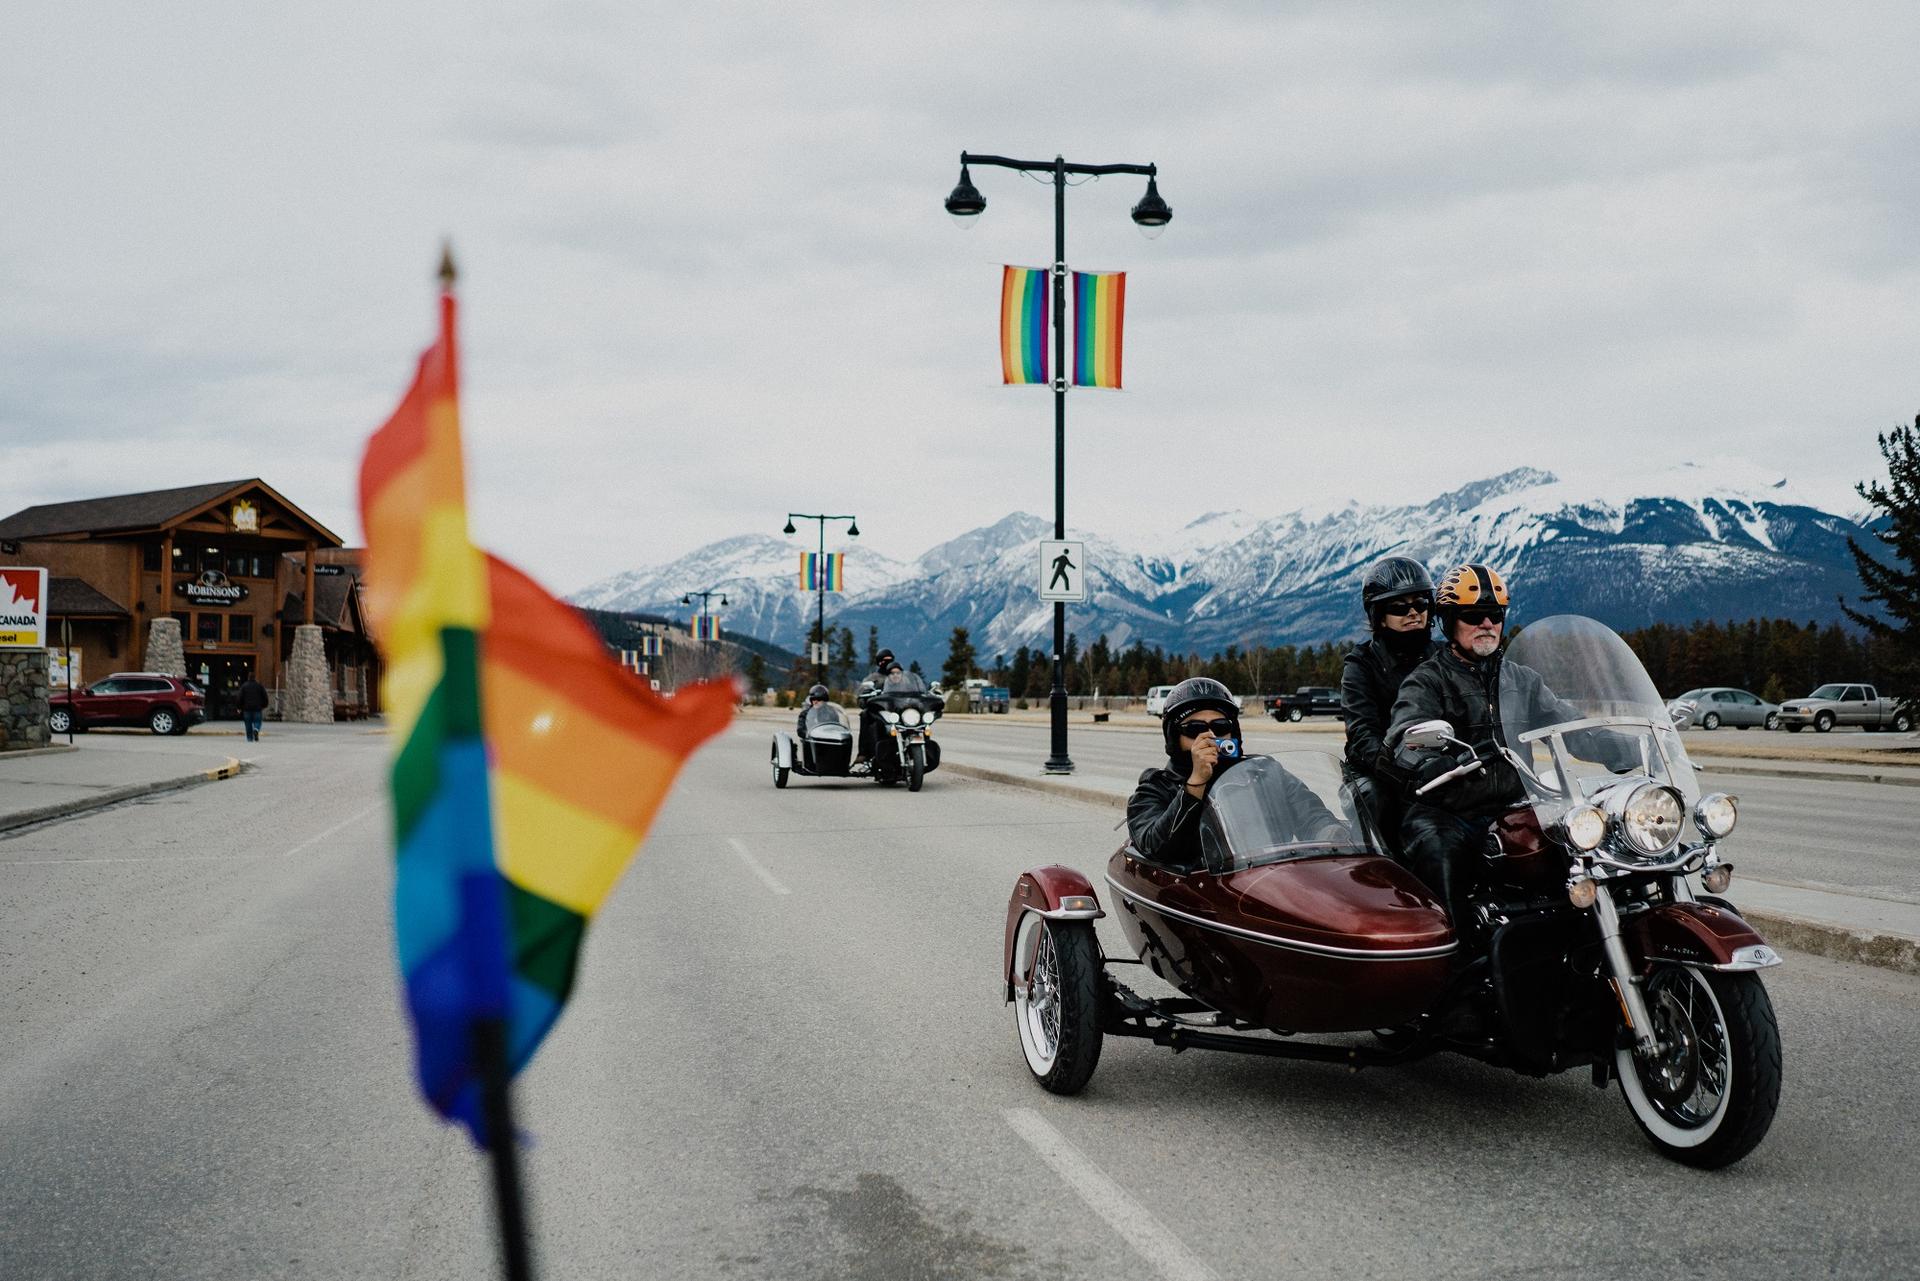 Motorcyclists celebrate pride with flags in Jasper